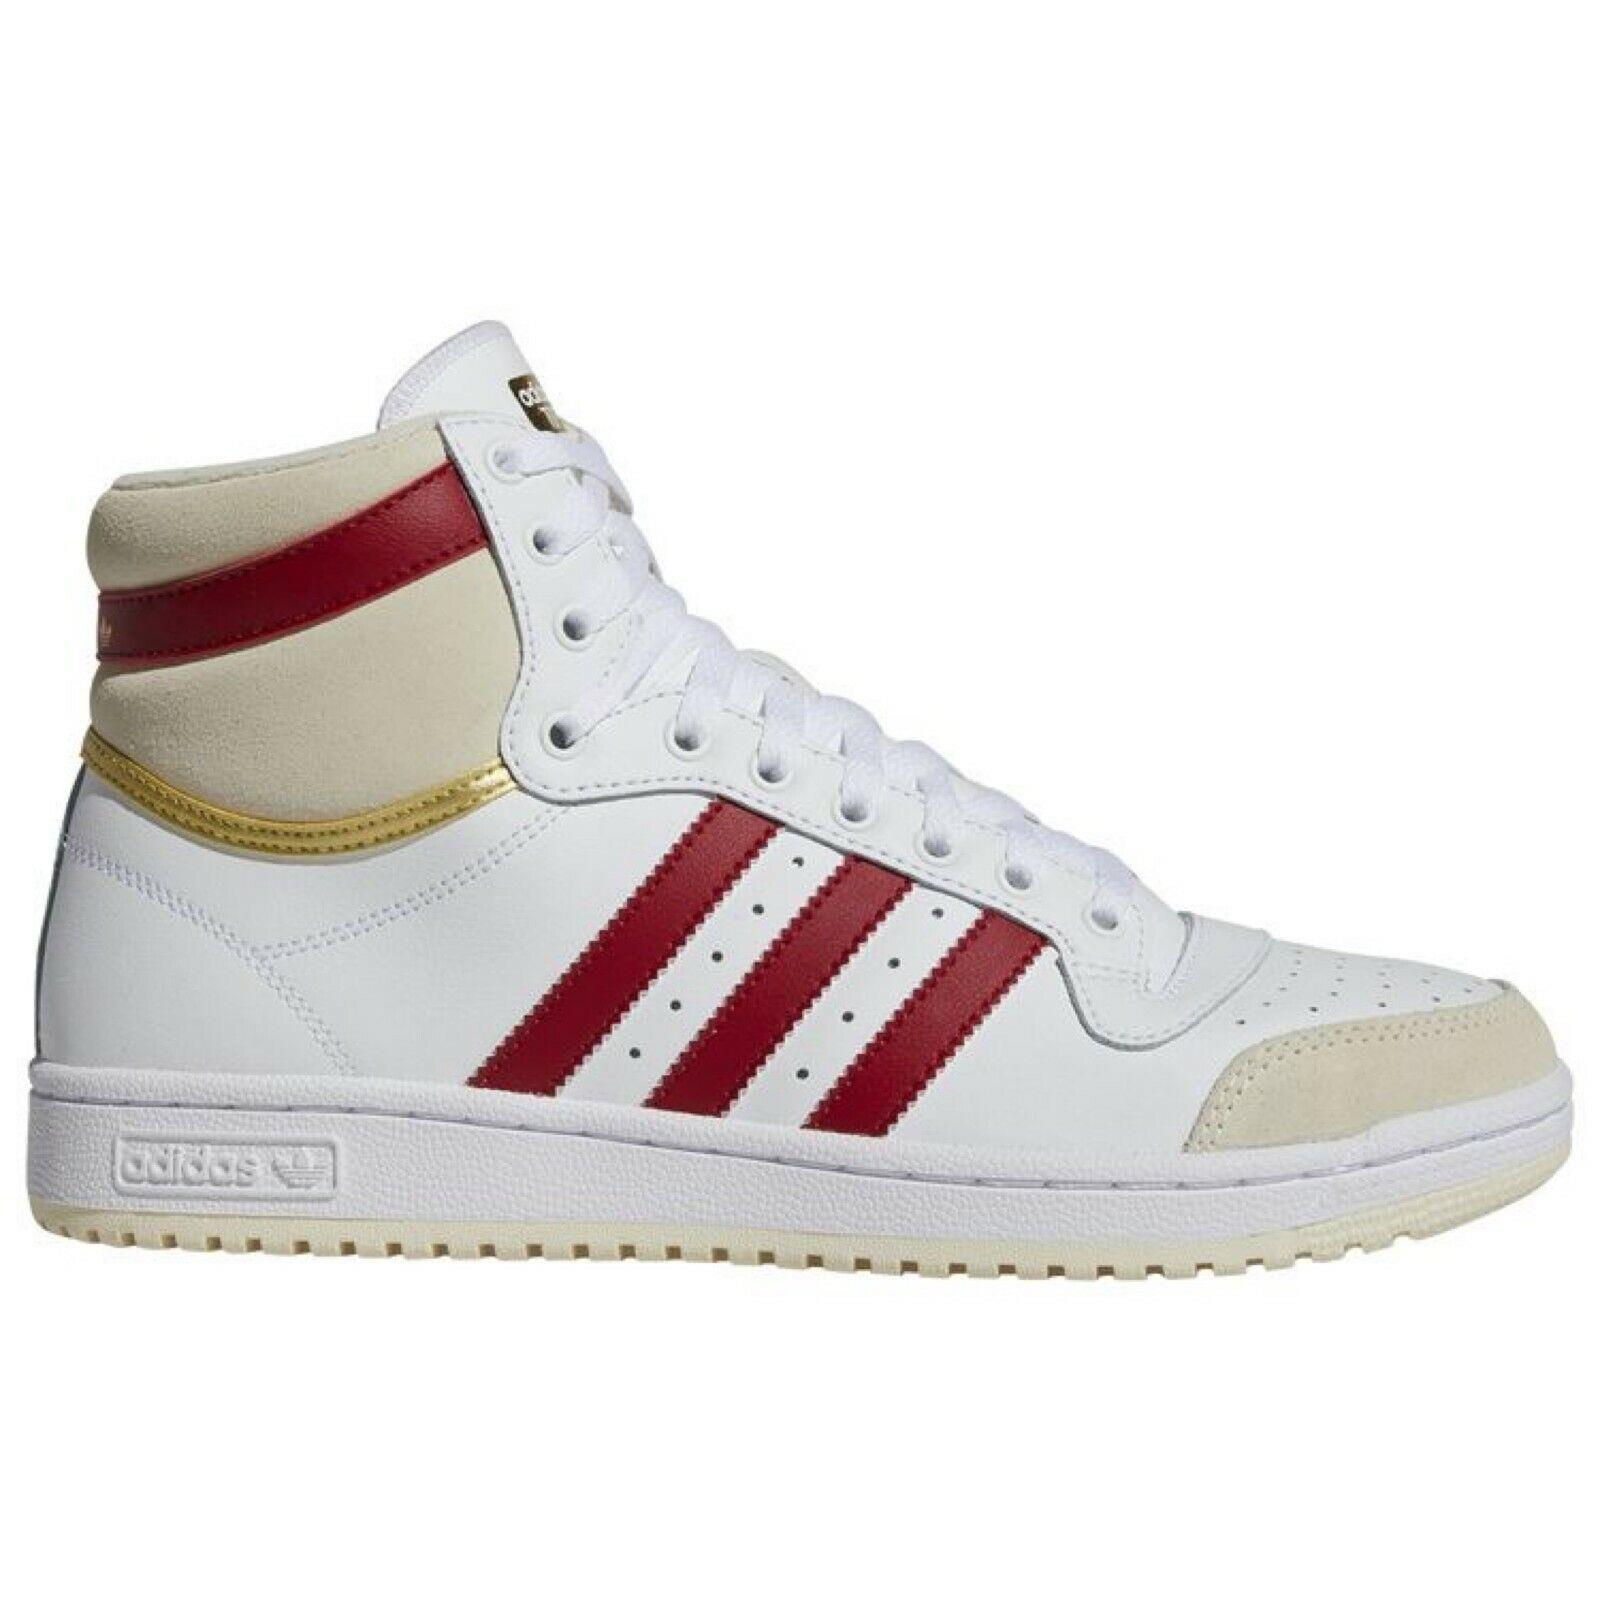 Adidas Originals Top Ten Mid Men`s Sneakers Comfort Sport Casual Shoes White Red - White , White/Red/White Manufacturer